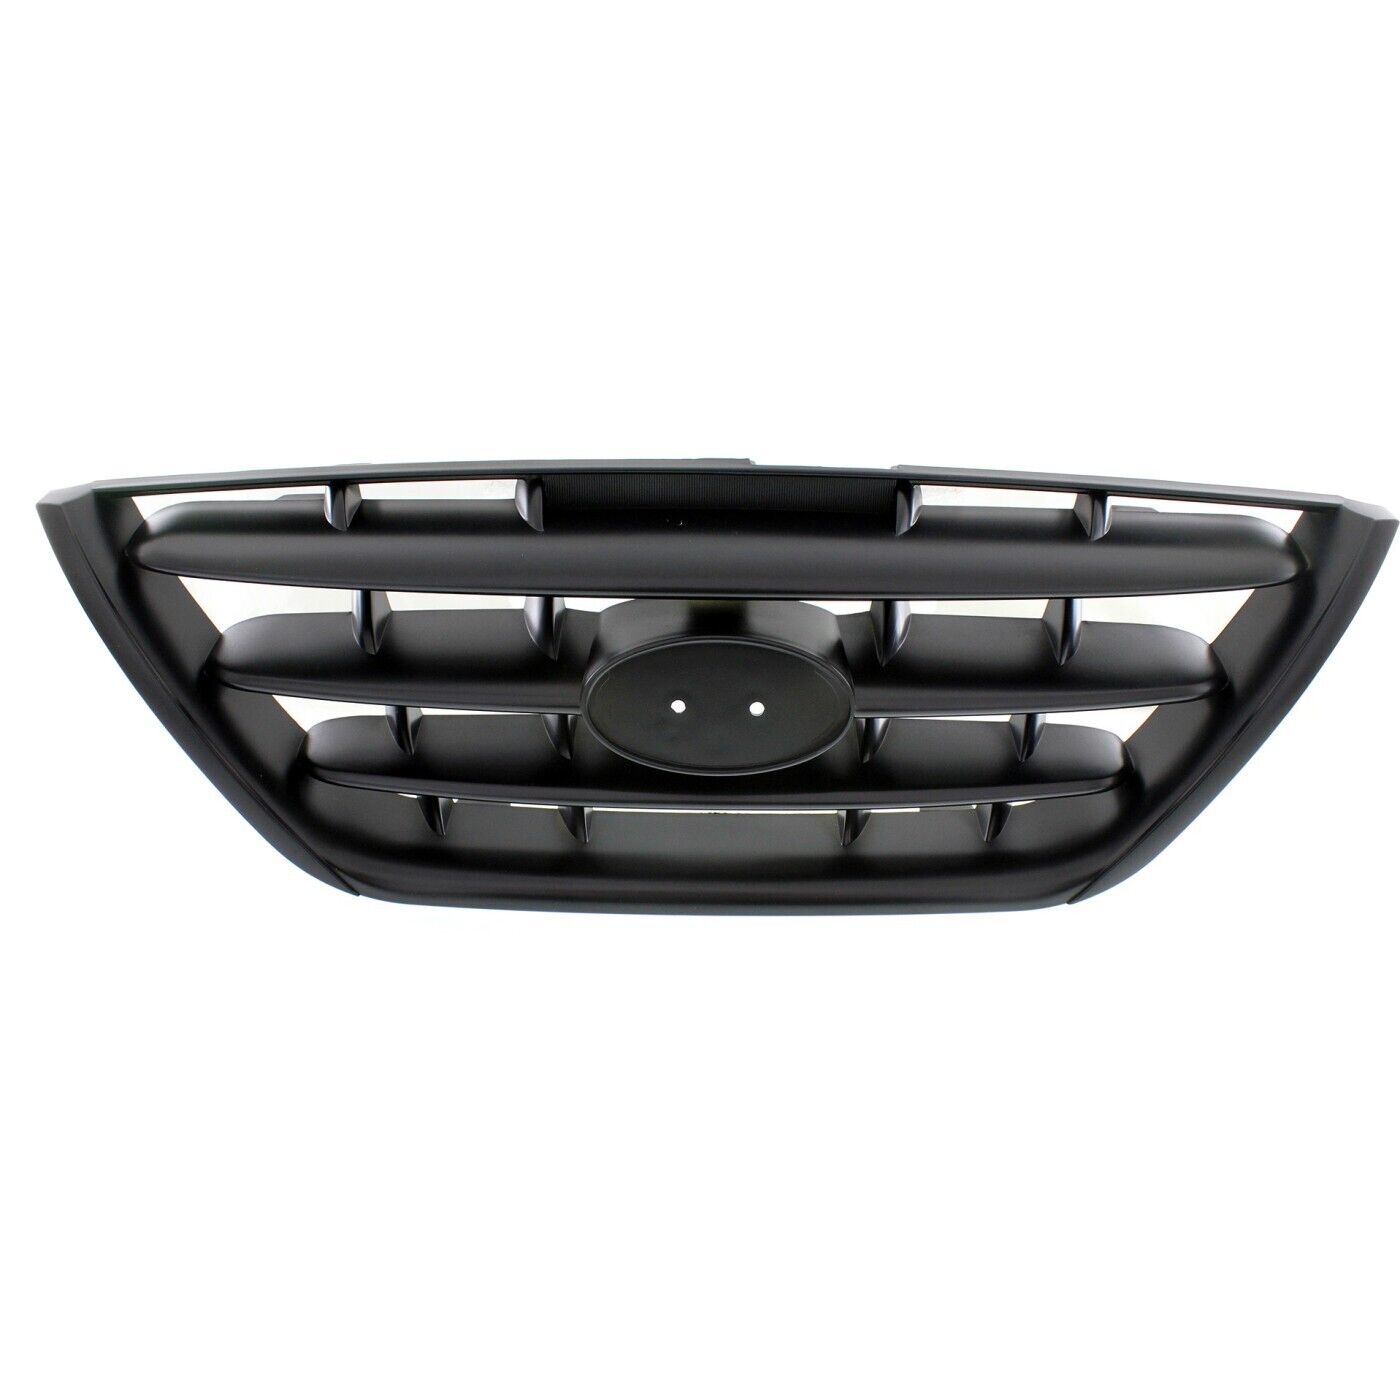 Grille For 2004-2006 Hyundai Elantra Painted Black Shell and Insert